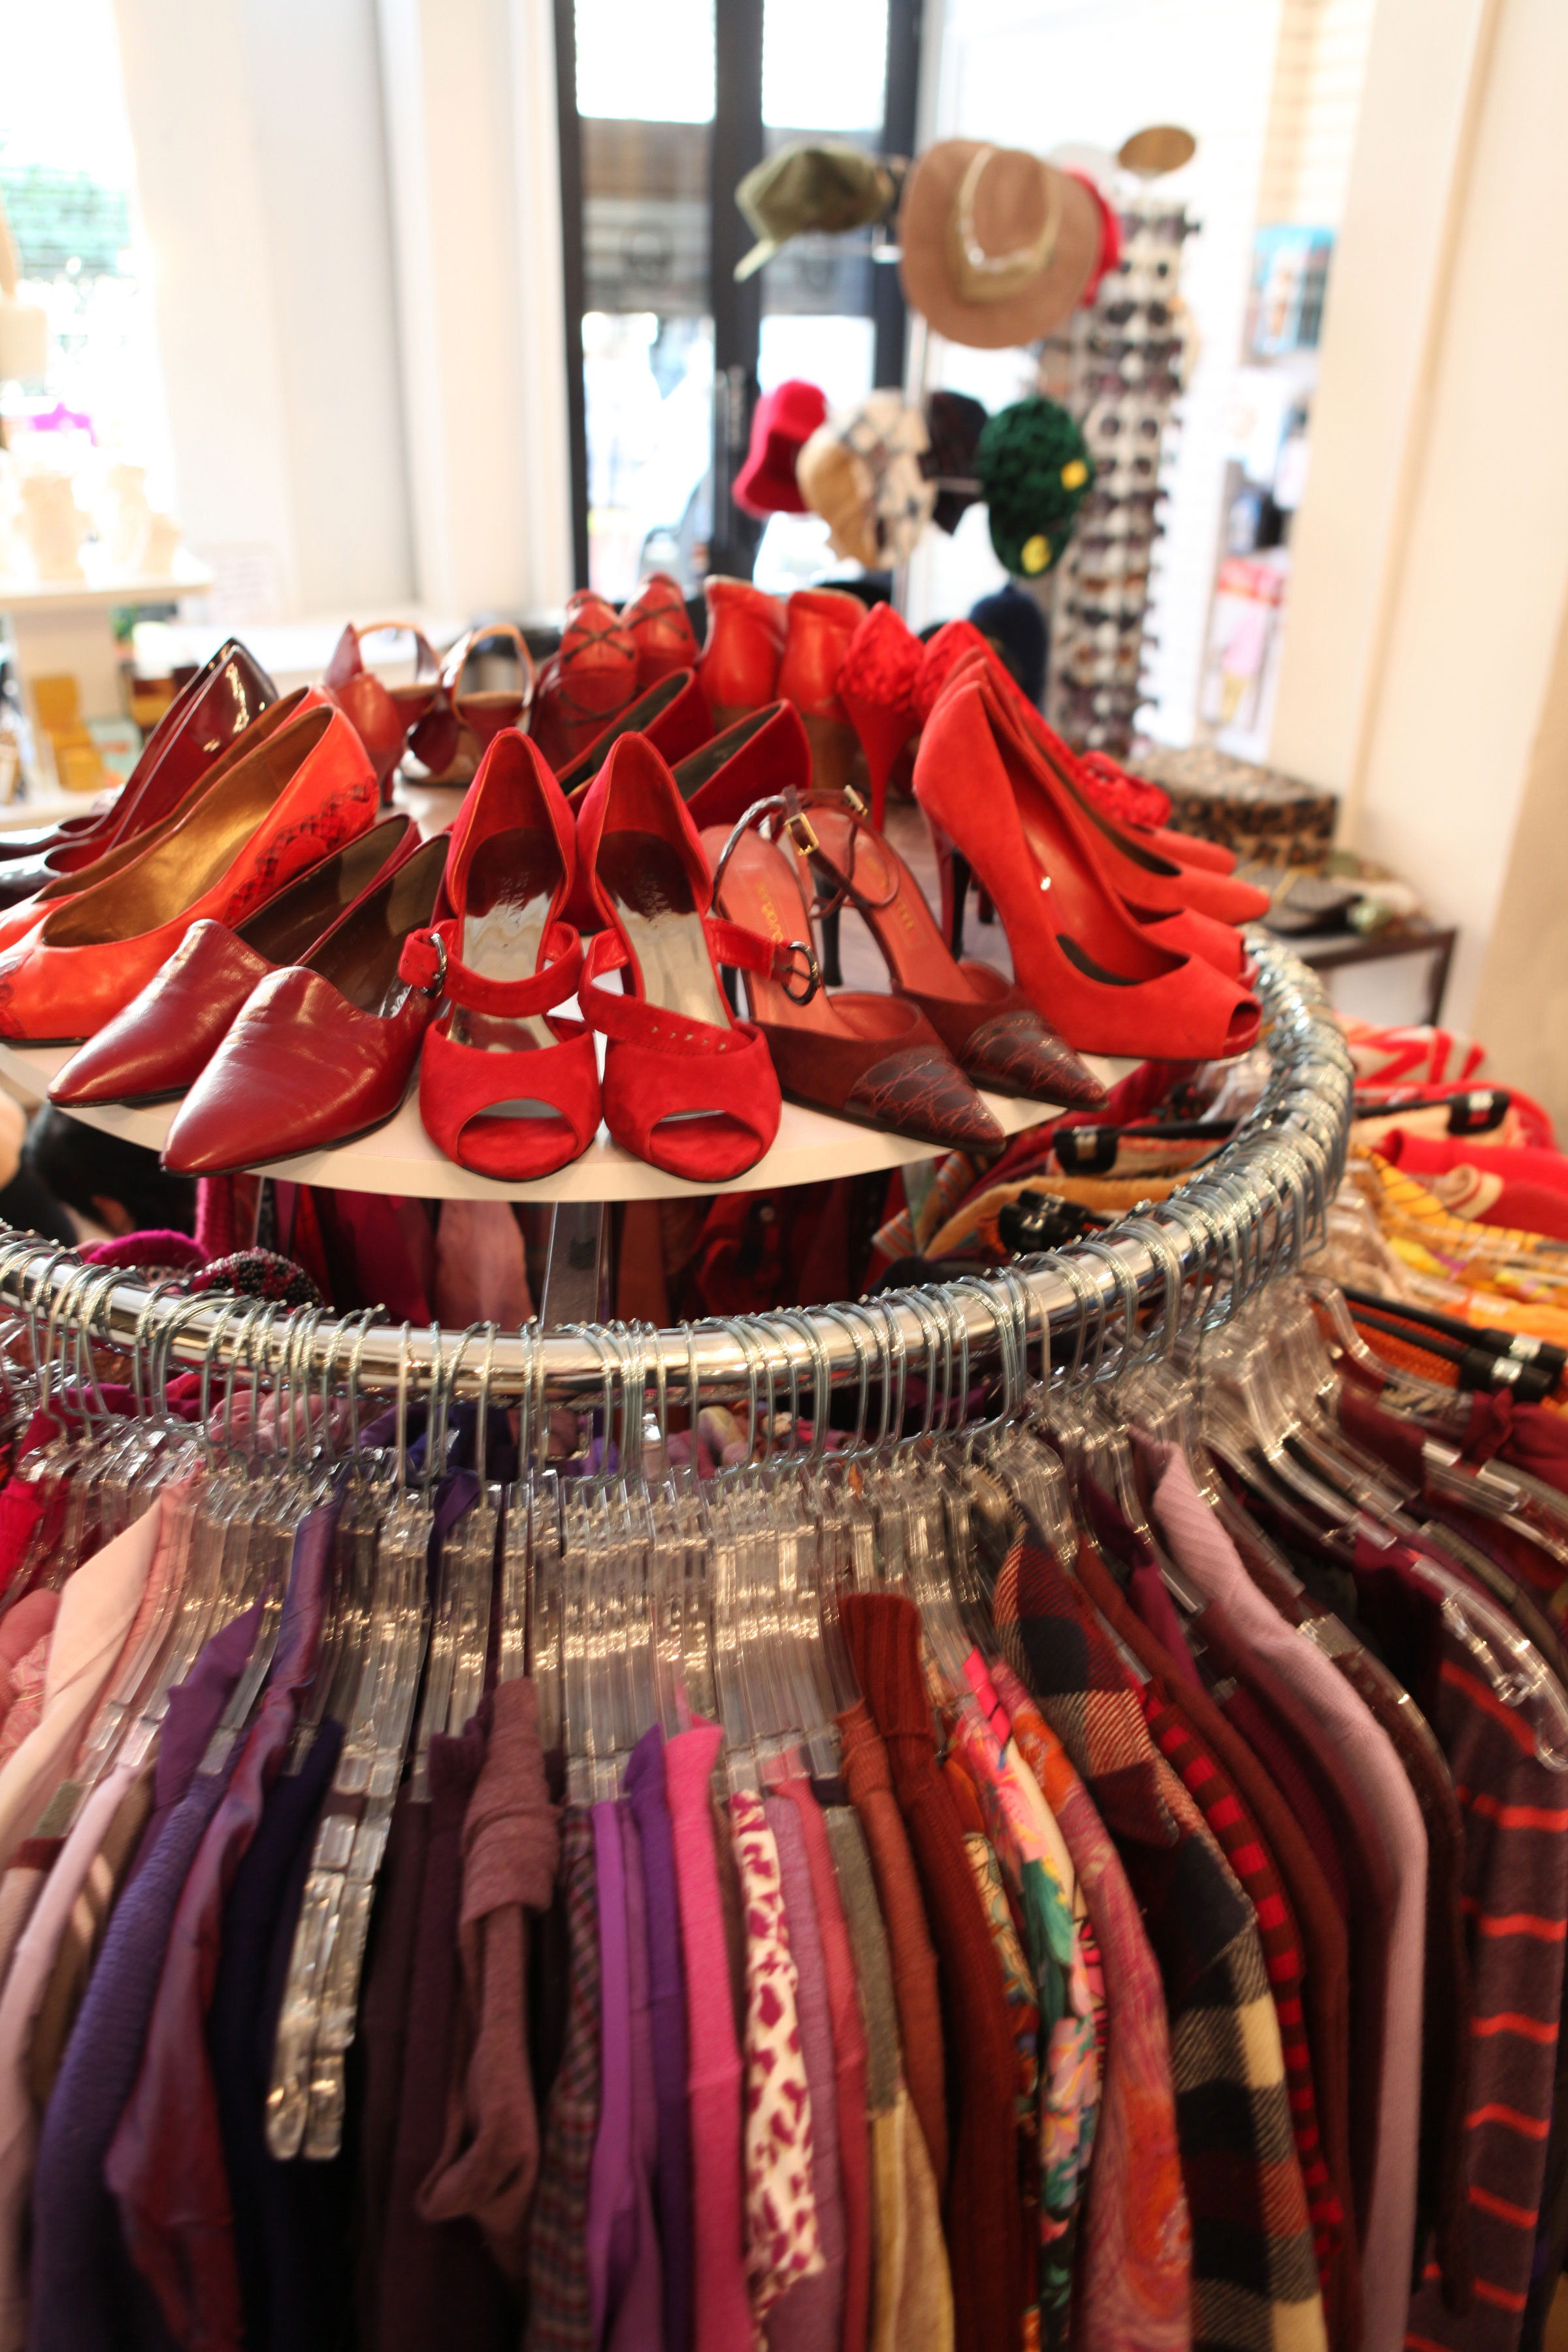 RED ALERT...stock is sorted by colour at Beacon's Closet. Photo by Scott Irvine